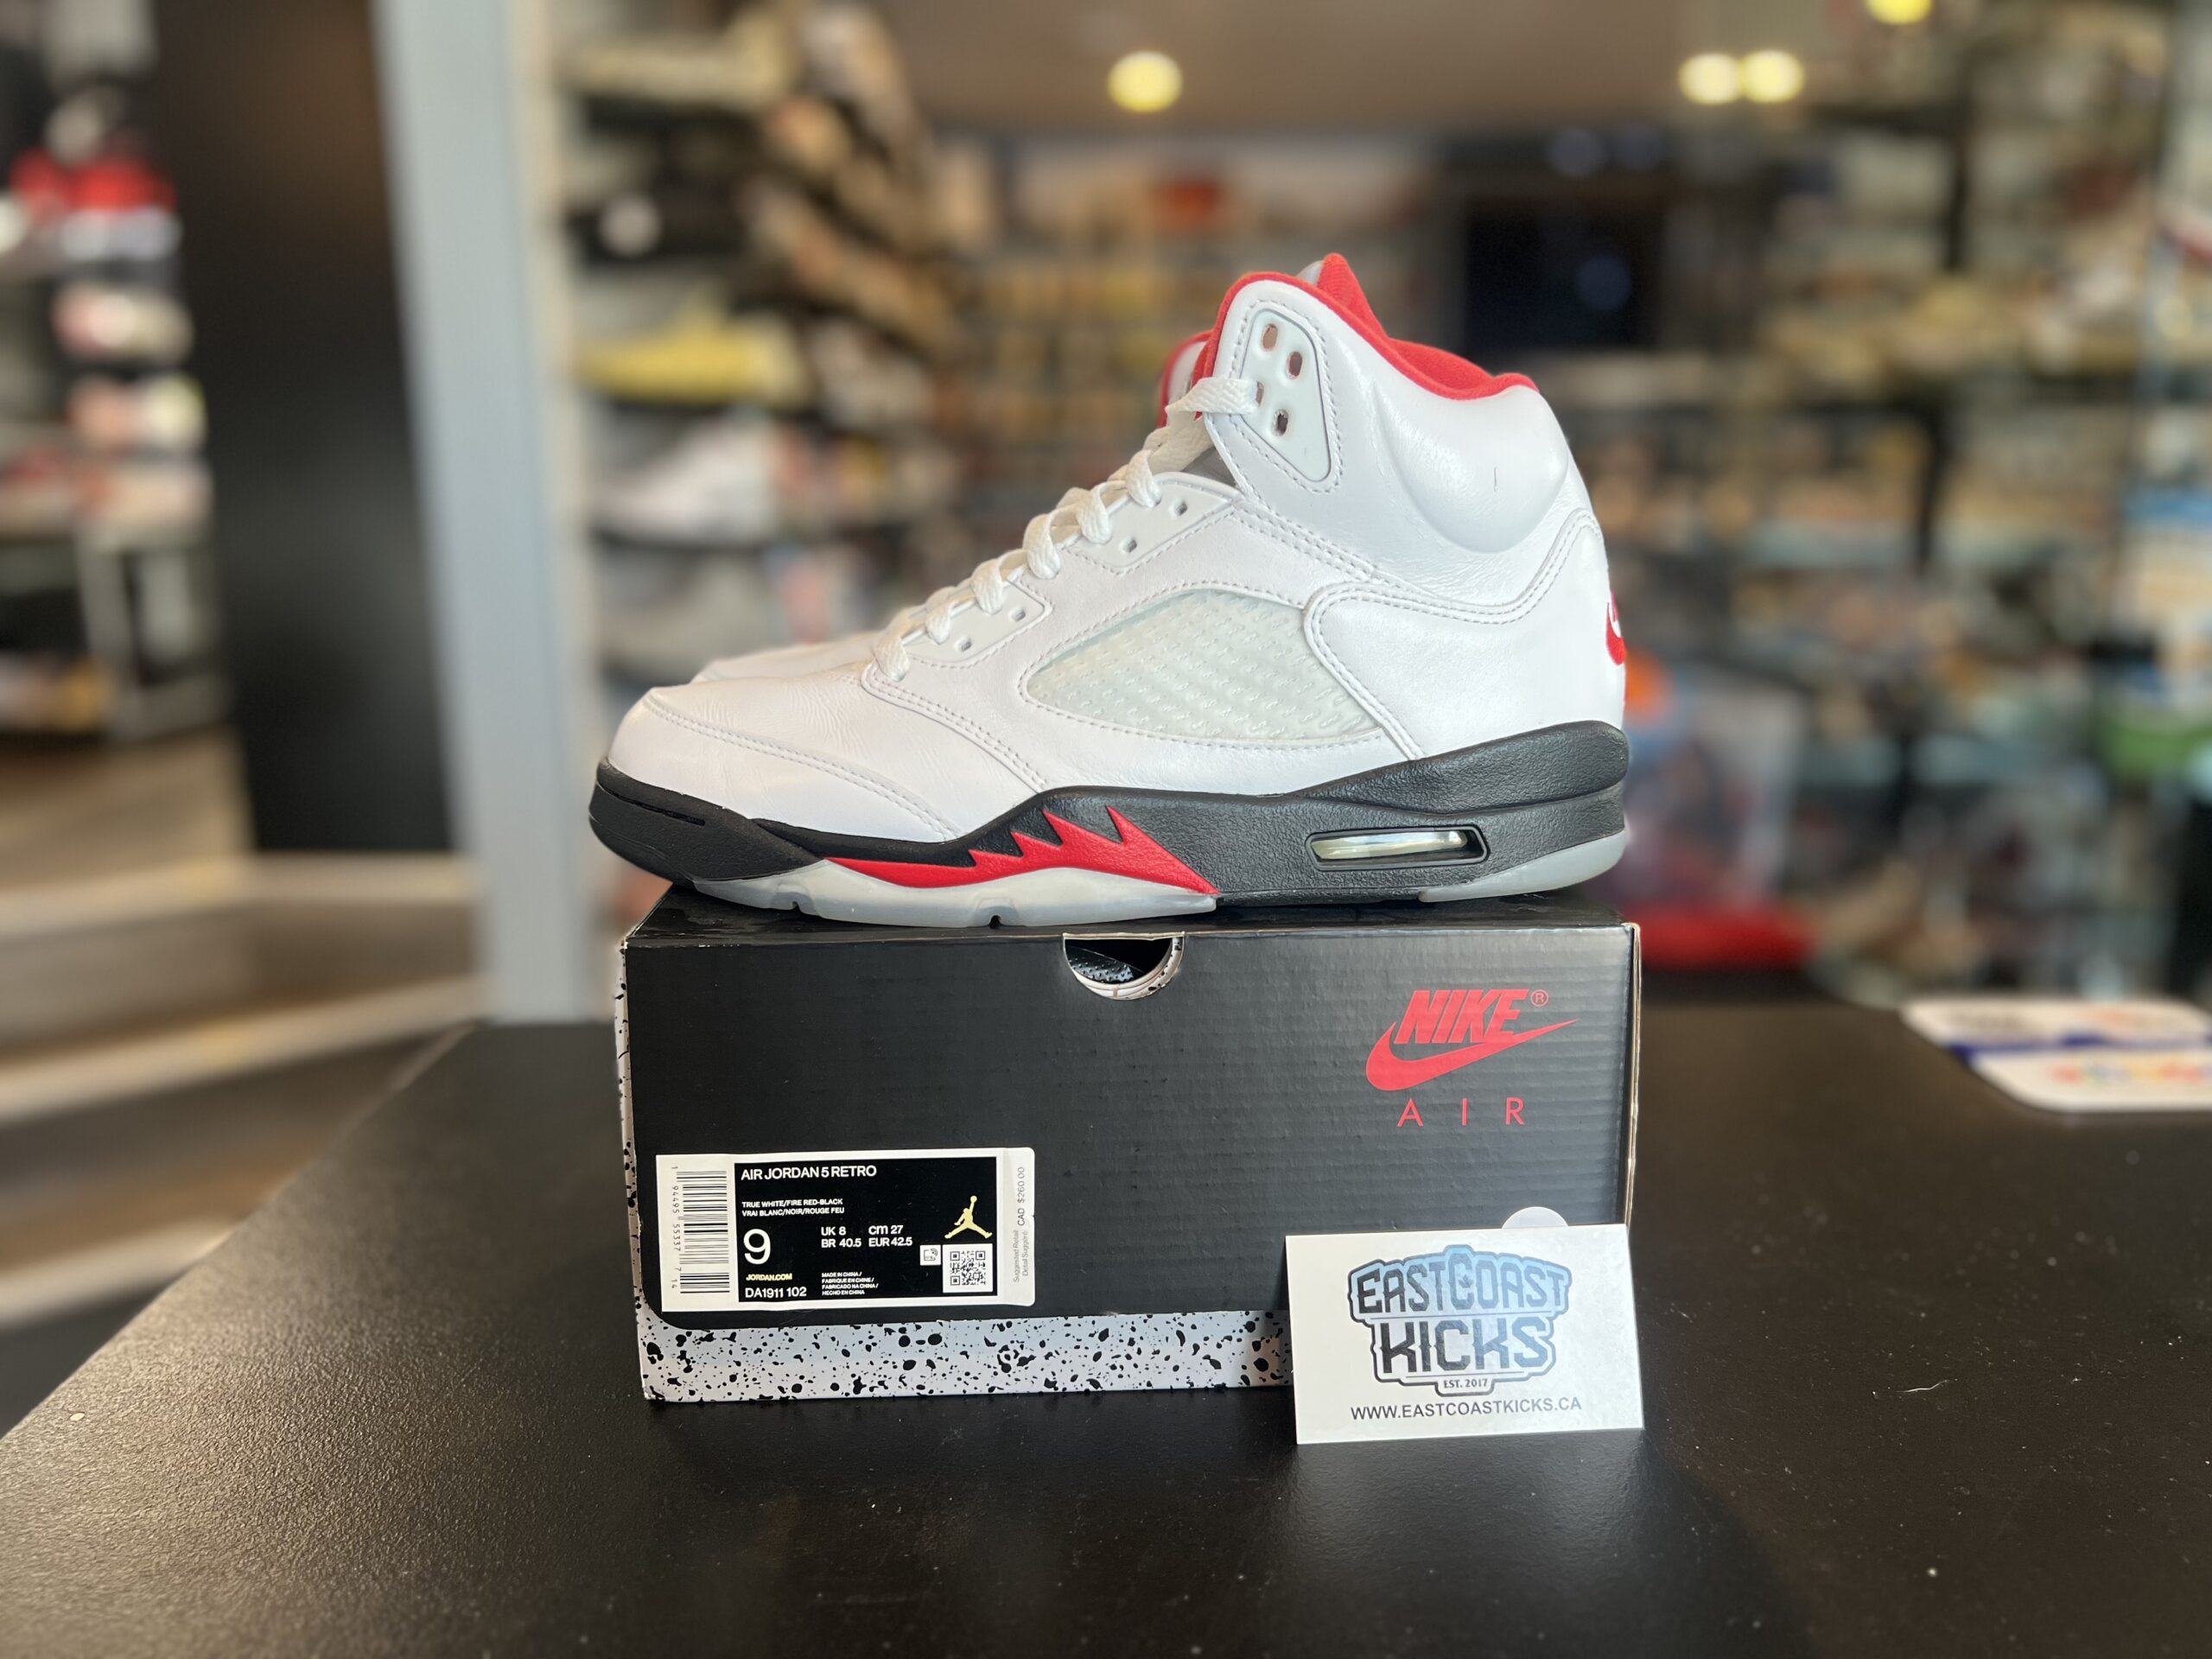 Preowned Jordan 5 Retro Fire Red Silver Tongue Size 9